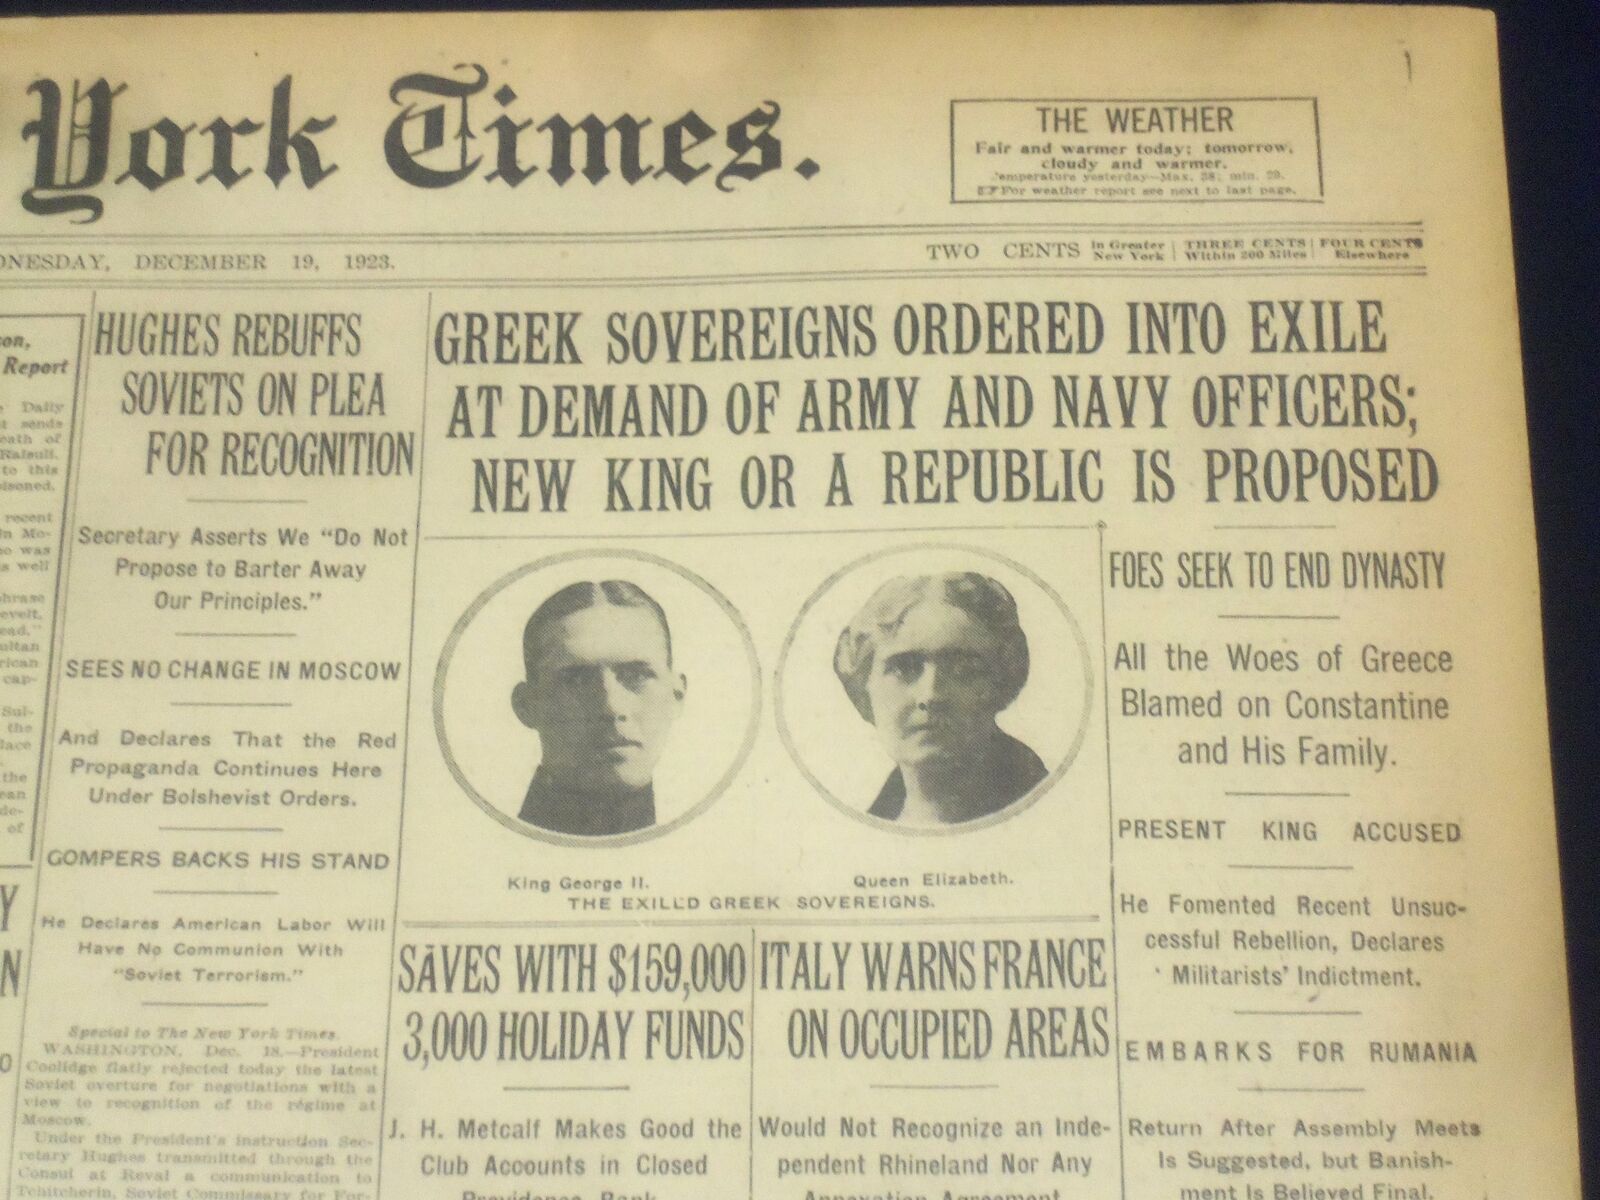 1923 DECEMBER 19 NEW YORK TIMES - GREEK SOVEREIGNS ORDERED INTO EXILE - NT 9230